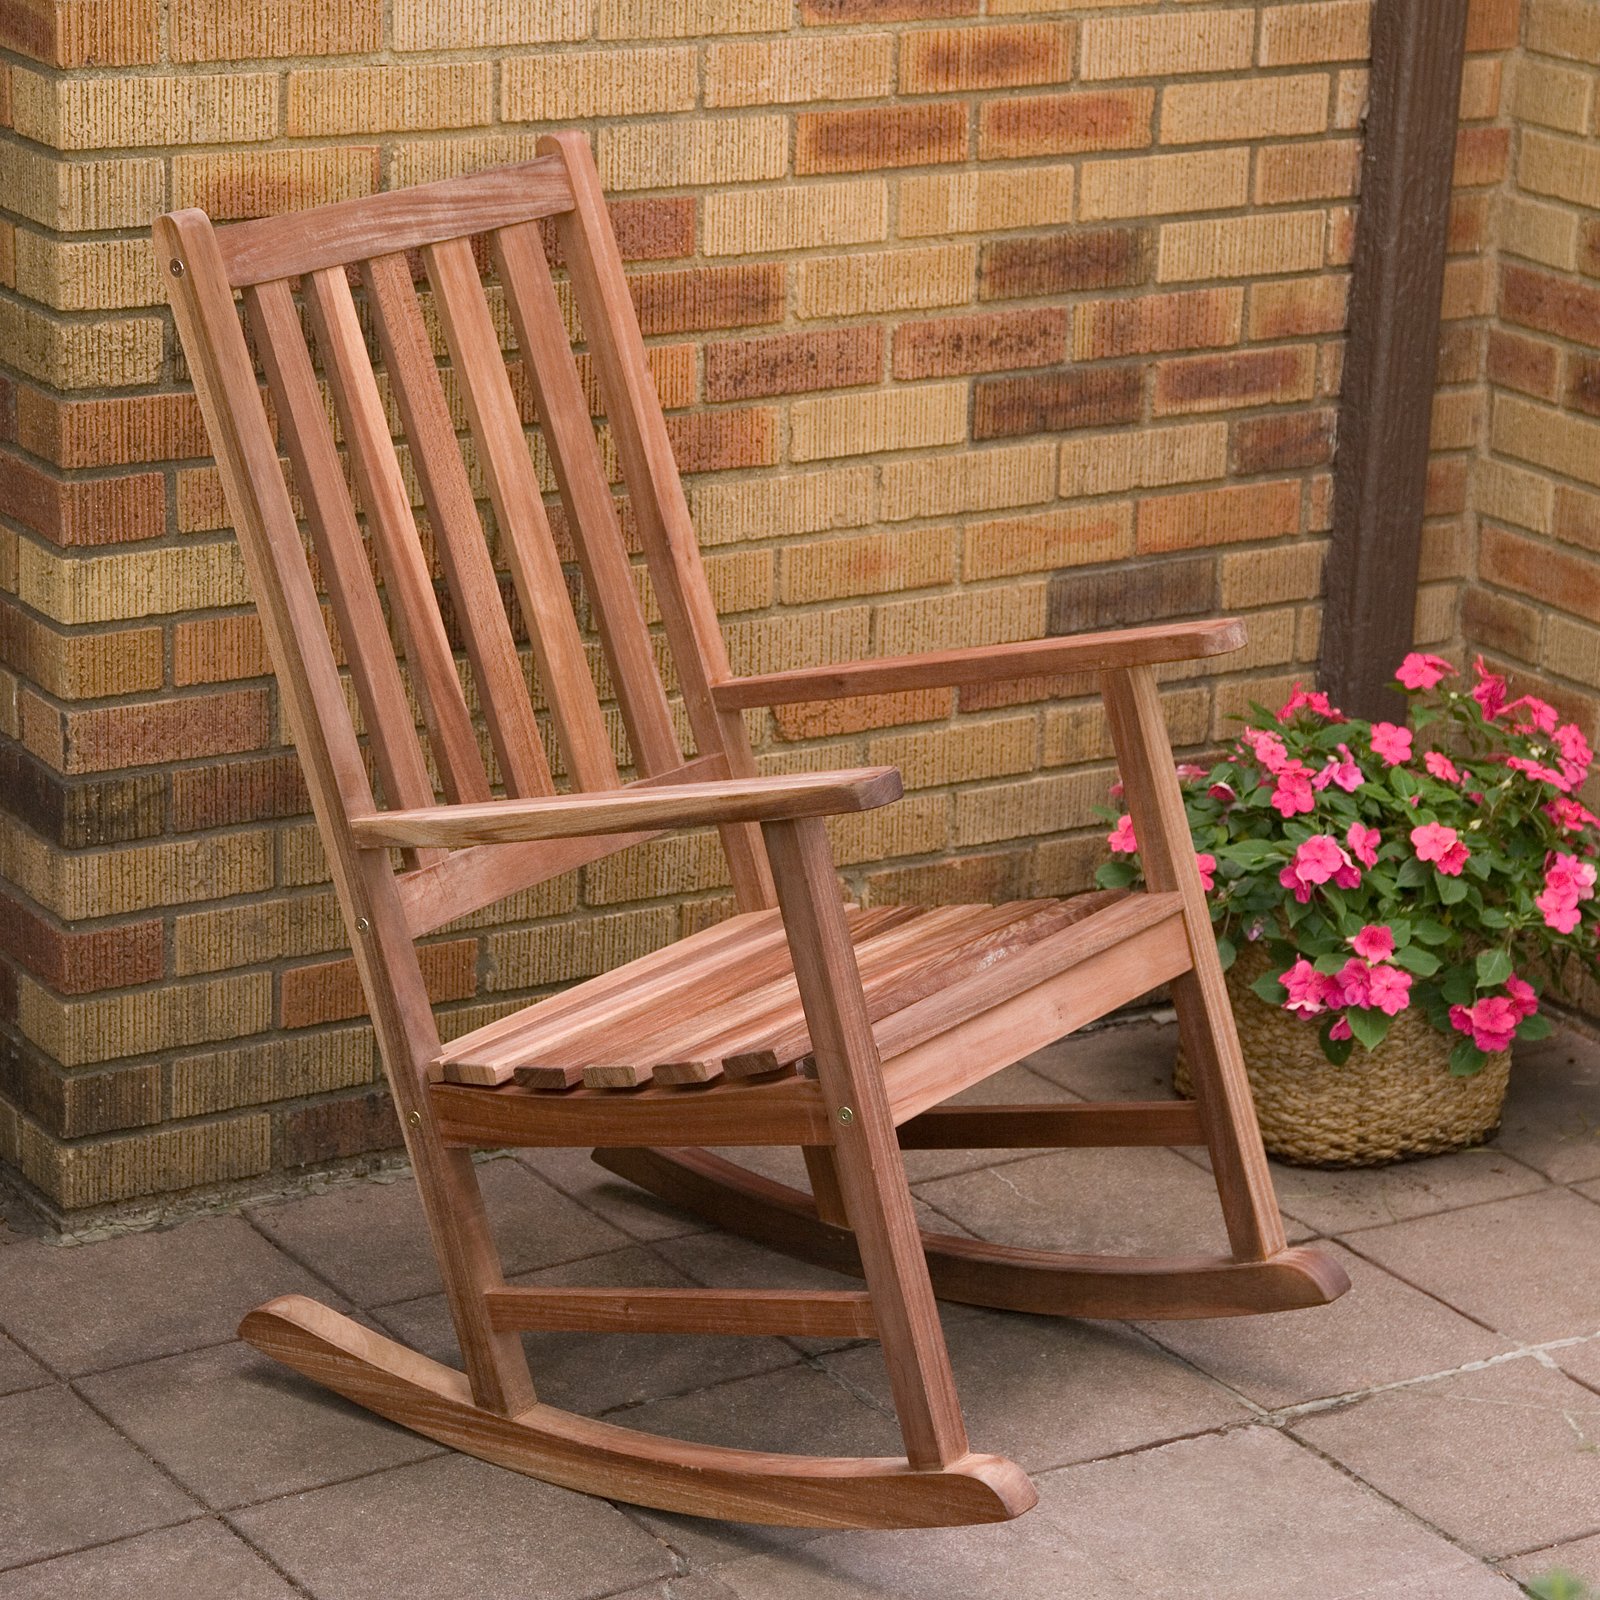 10+ Outdoor Rocking Chair Ideas (How To Choose?)